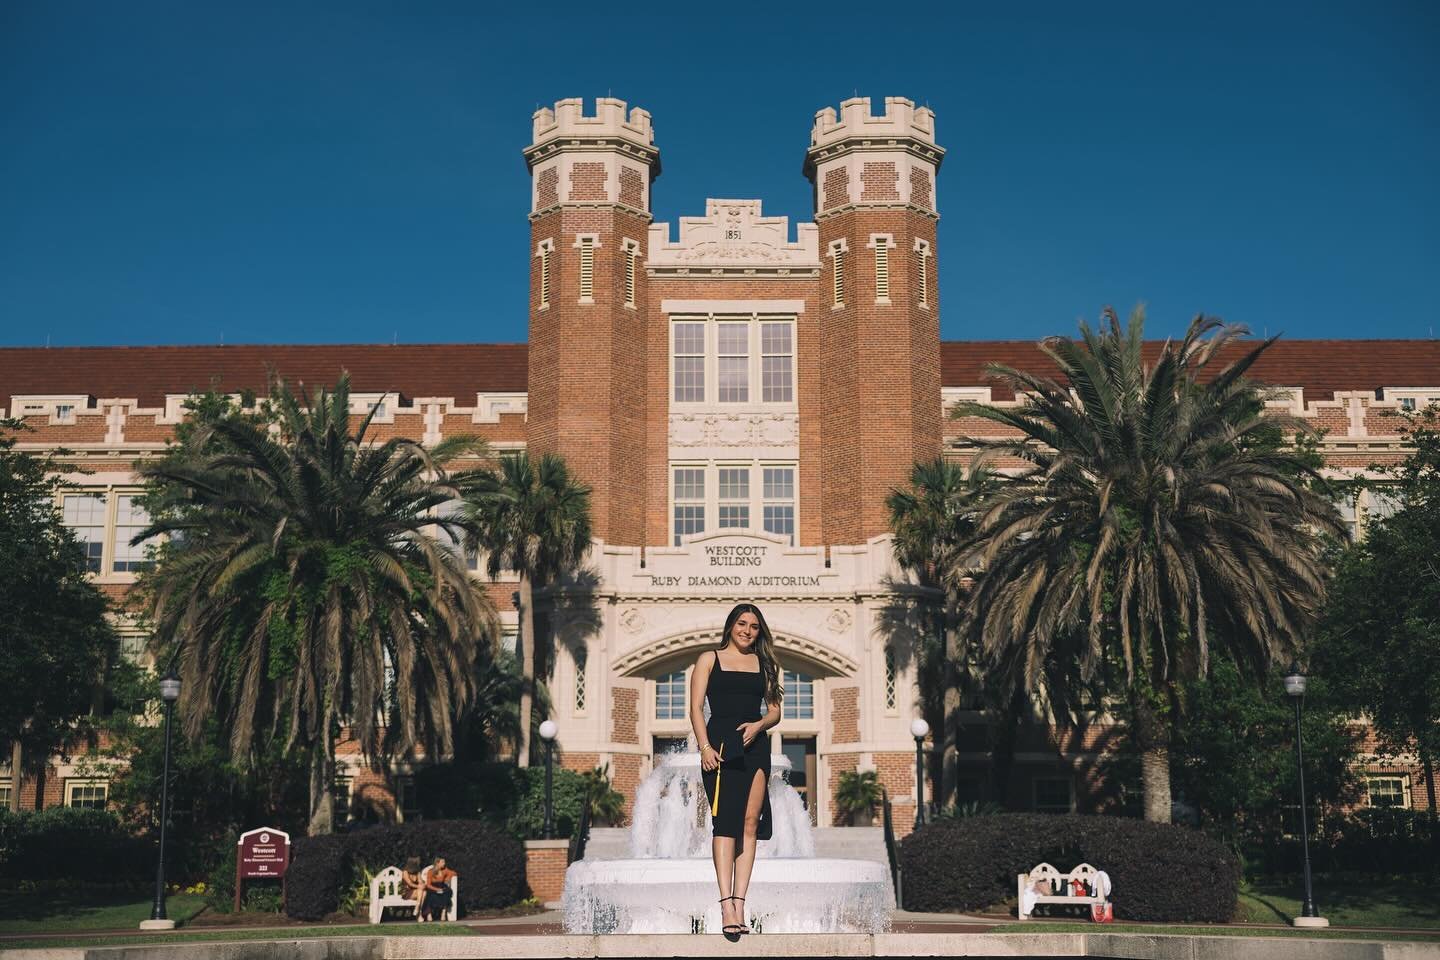 Slacking on my IG duties! It&rsquo;s so hard to want to post when these algorithms make it where no one actually sees our work! 😫 

Check out this beautiful senior, Bryanna! We had the best time exploring campus and getting some not so basic grad pi